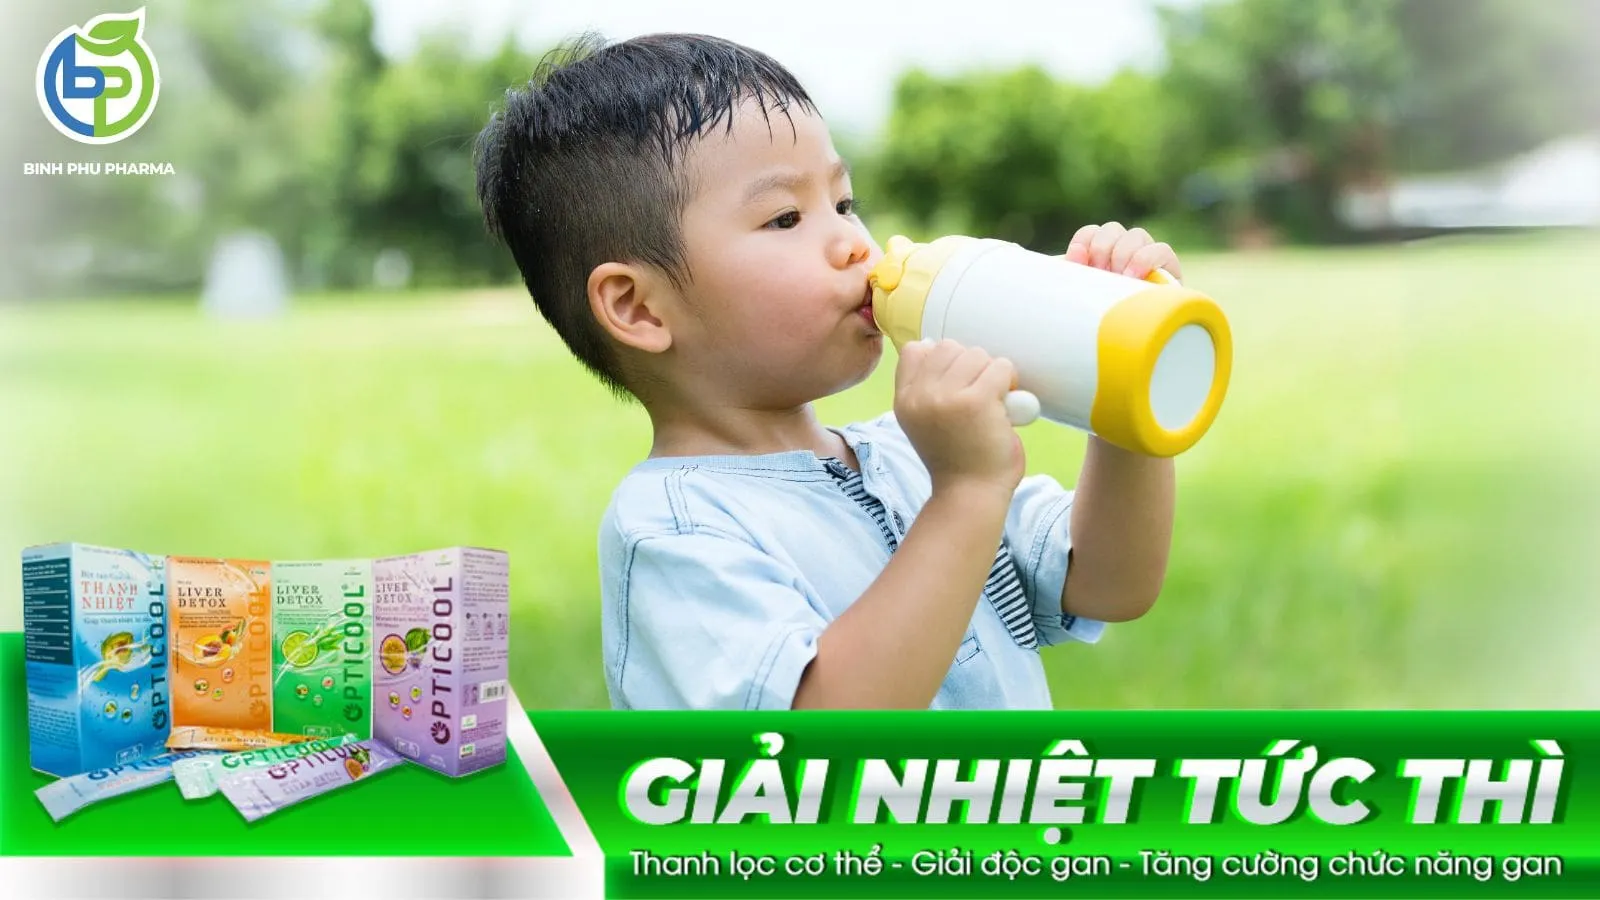 Feature image for post: CẦN SỦI THANH NHIỆT CHO TRẺ EM, CHỌN NGAY OPTICOOL